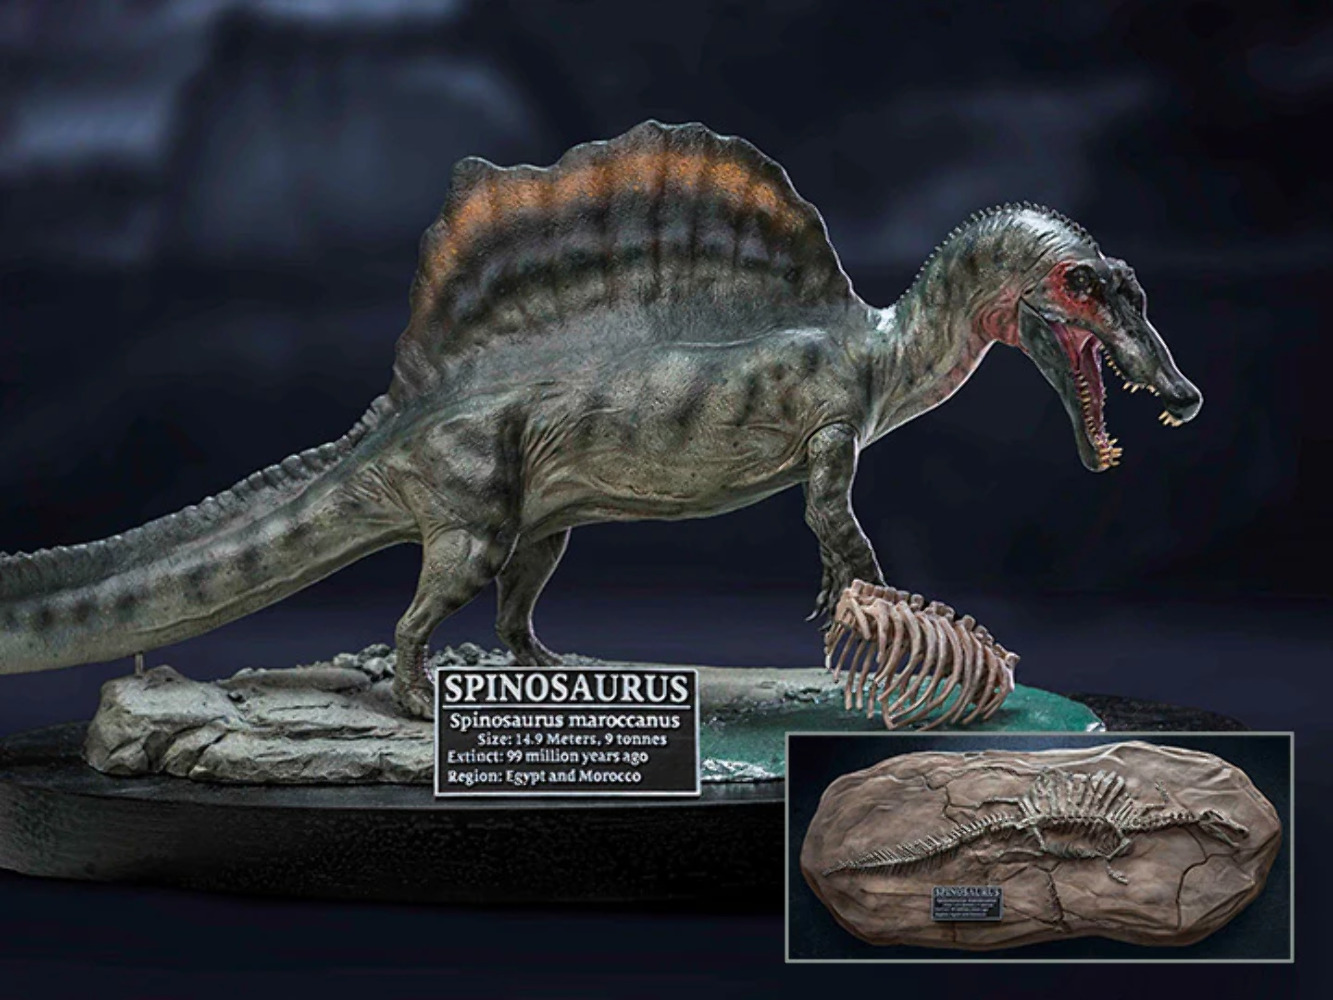 STAR ACE X PLUS Wonders of the Wild Spinosaurus 2.0 Land Version DELUXE Statue